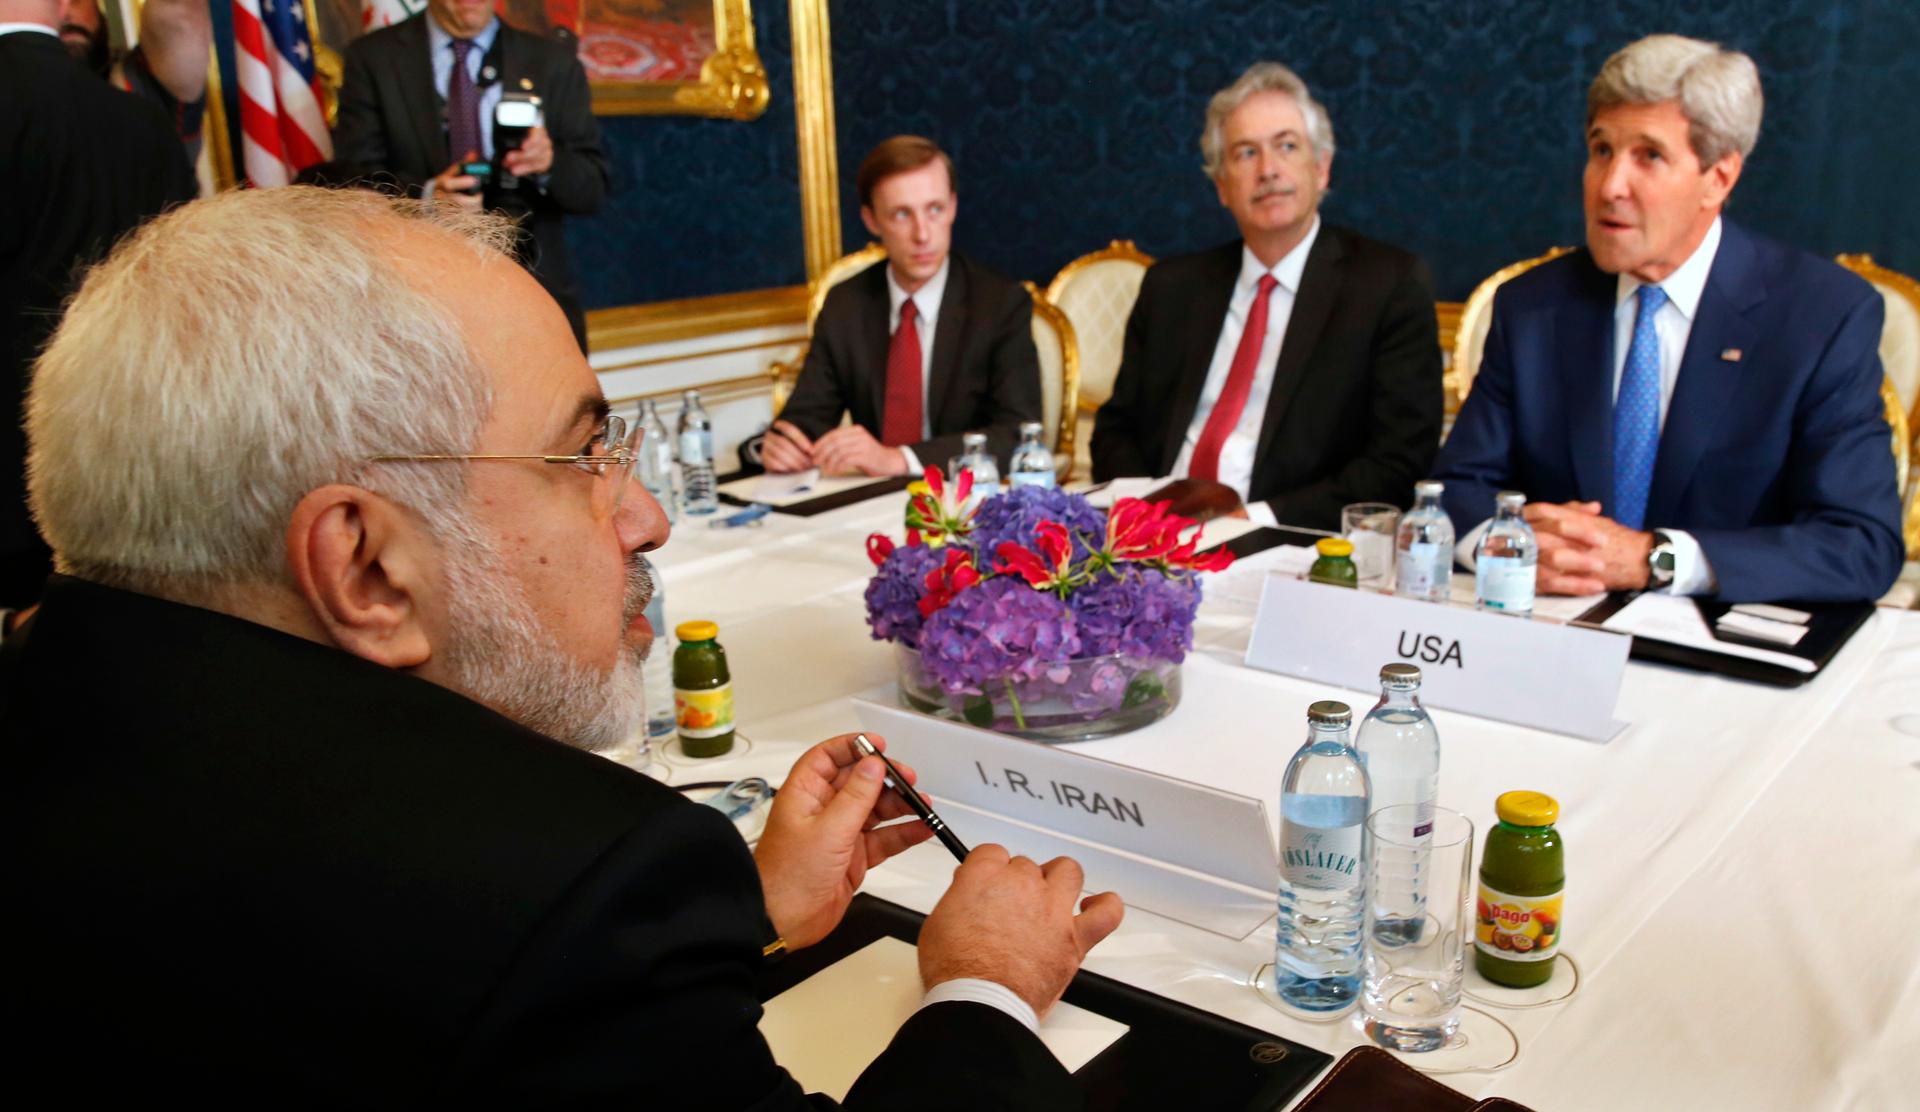 Iran's Foreign Minister Javad Zarif (L) holds a bilateral meeting with U.S. Secretary of State John Kerry (R) on the second straight day of talks over Tehran's nuclear program in Vienna, July 14, 2014.